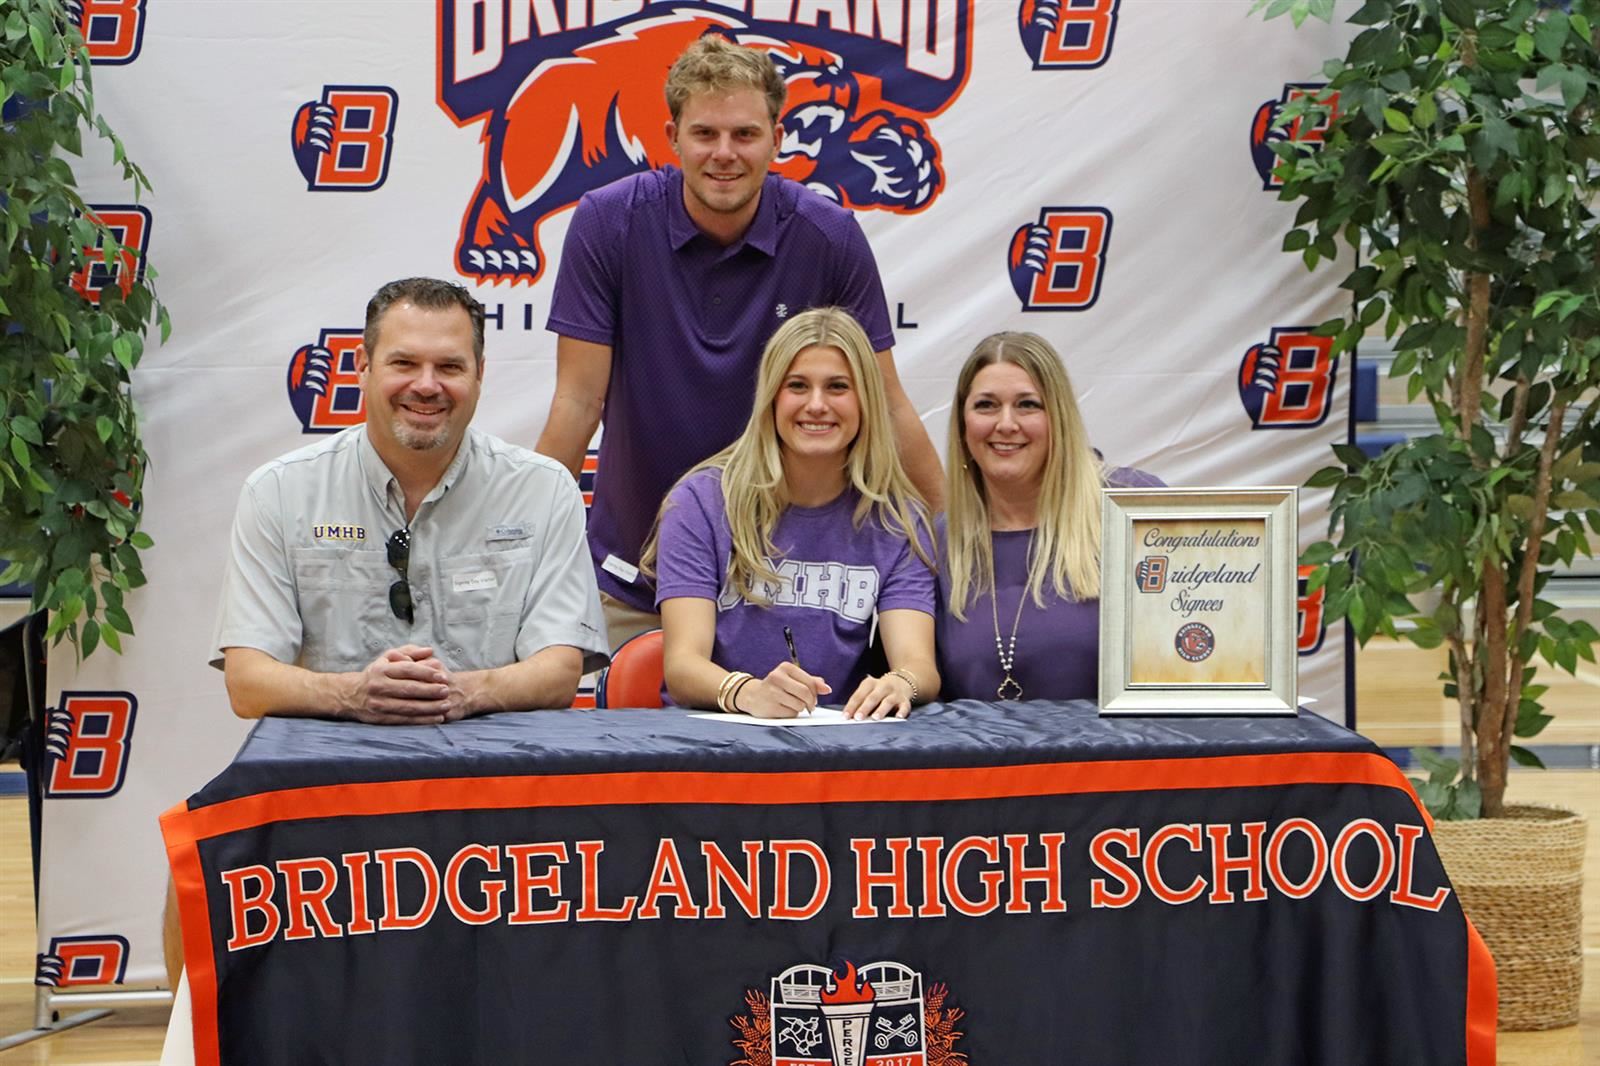 Bridgeland High School senior Raylee Schaffner, seated center, signed her letter of intent to play volleyball.